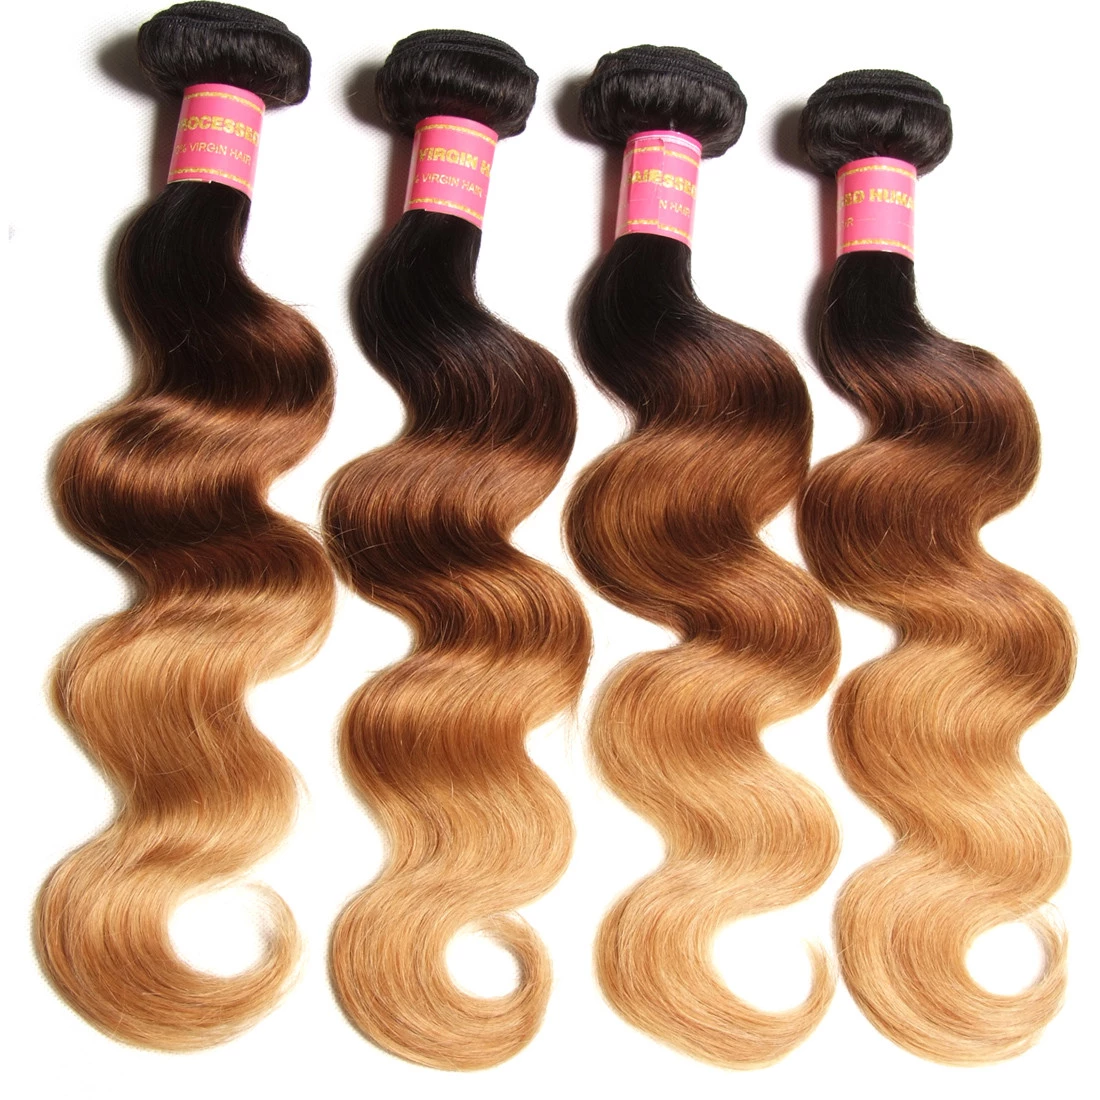 lumiere Hair Peruvian Ombre Body Wave 4 Bundles with 4X4 Closure Human Hair Free Shipping